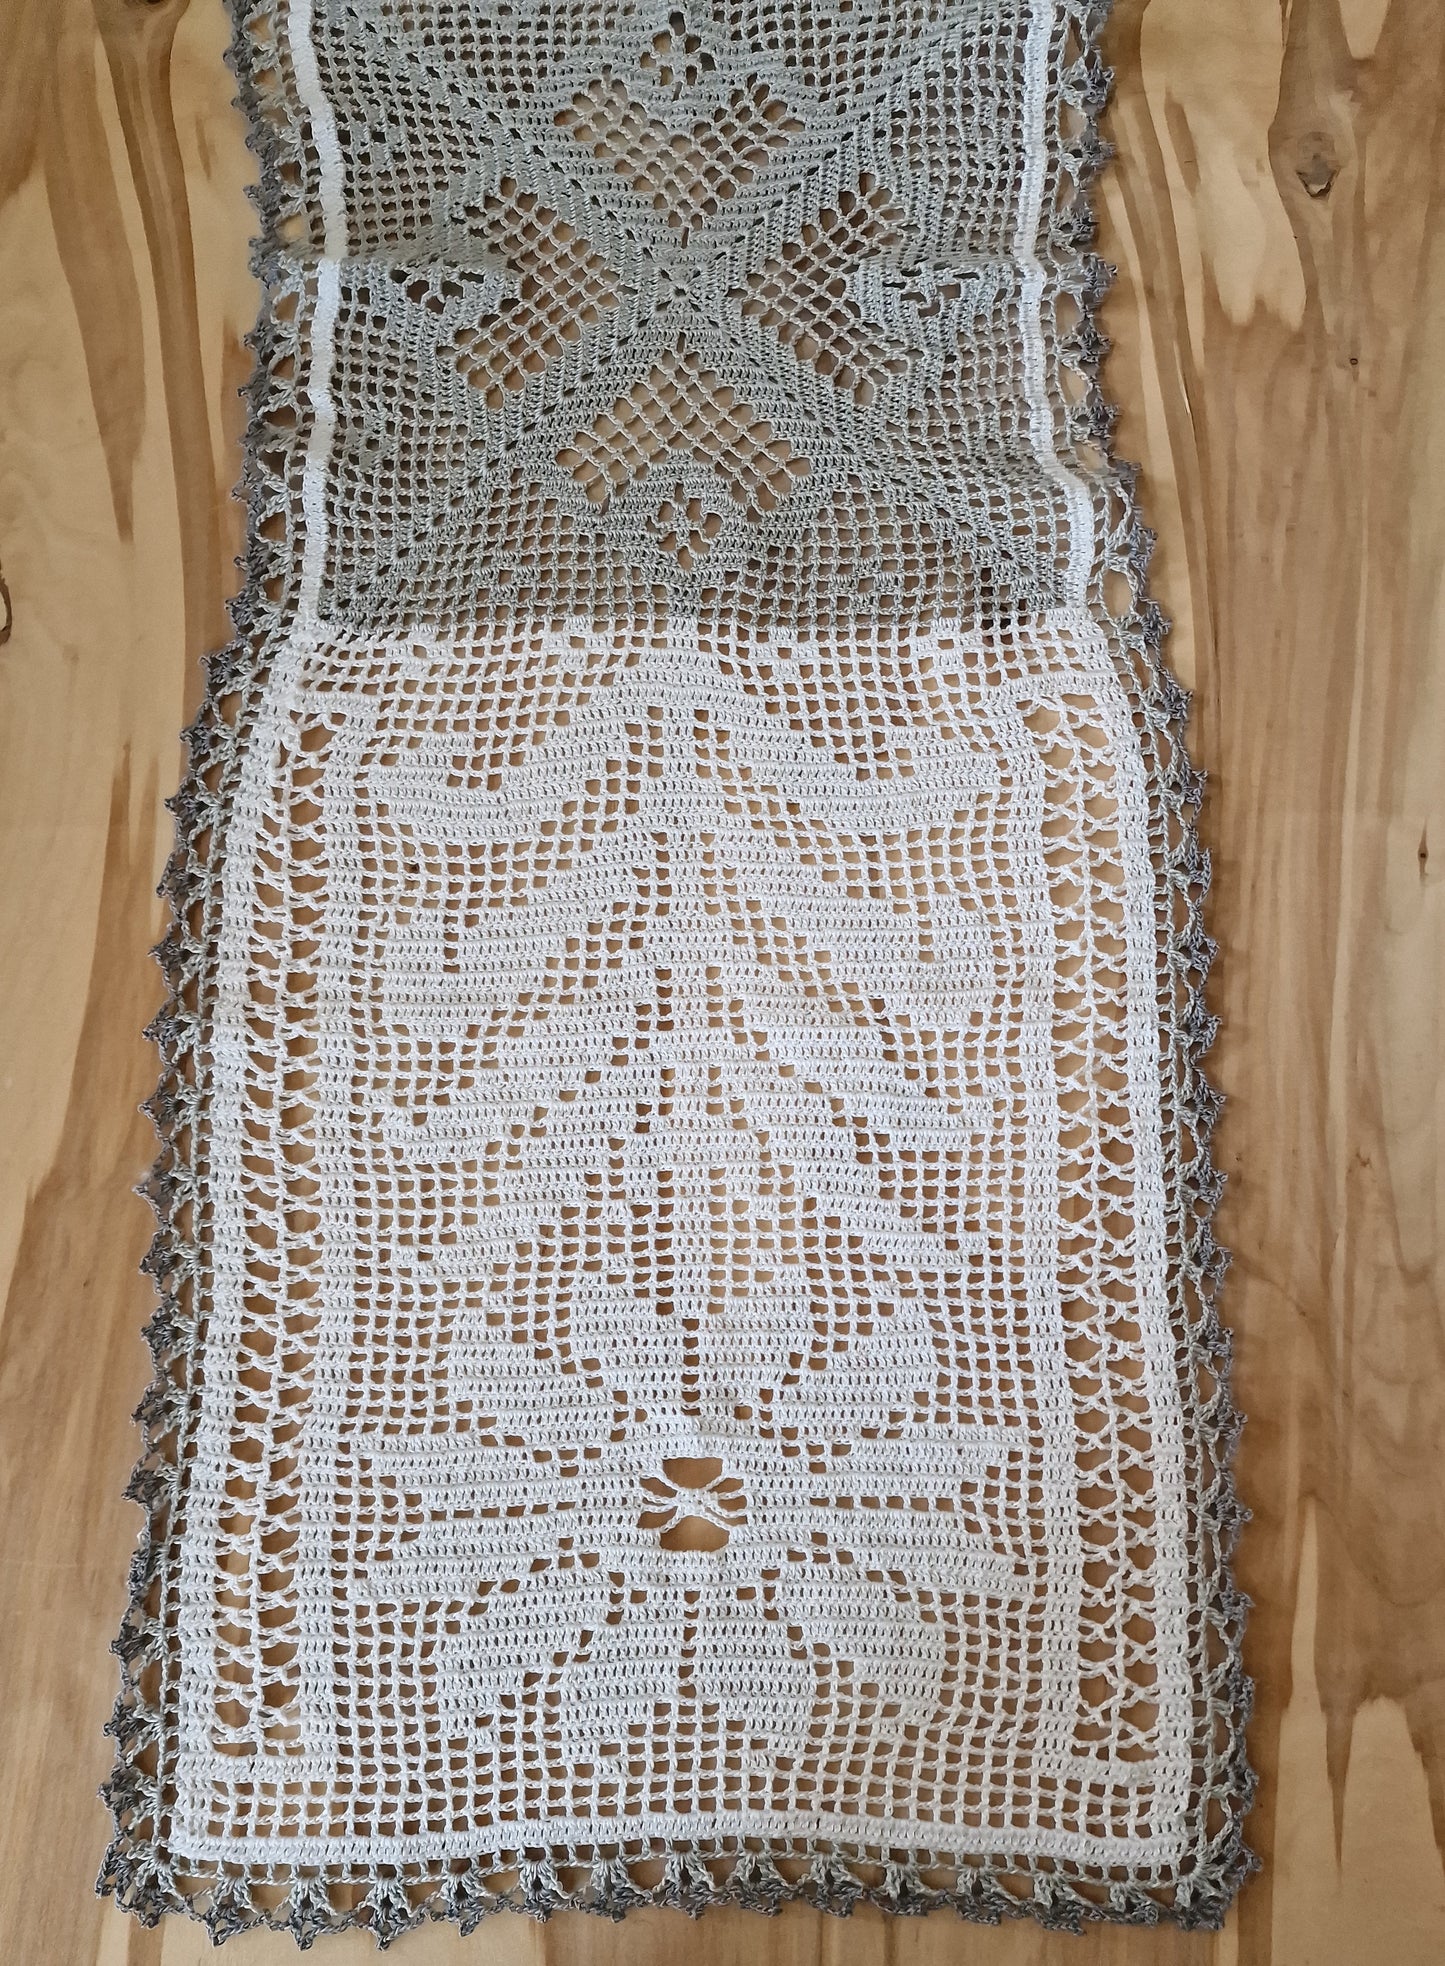 Crocheted round tablecloth white / gray (LIĒR 20)